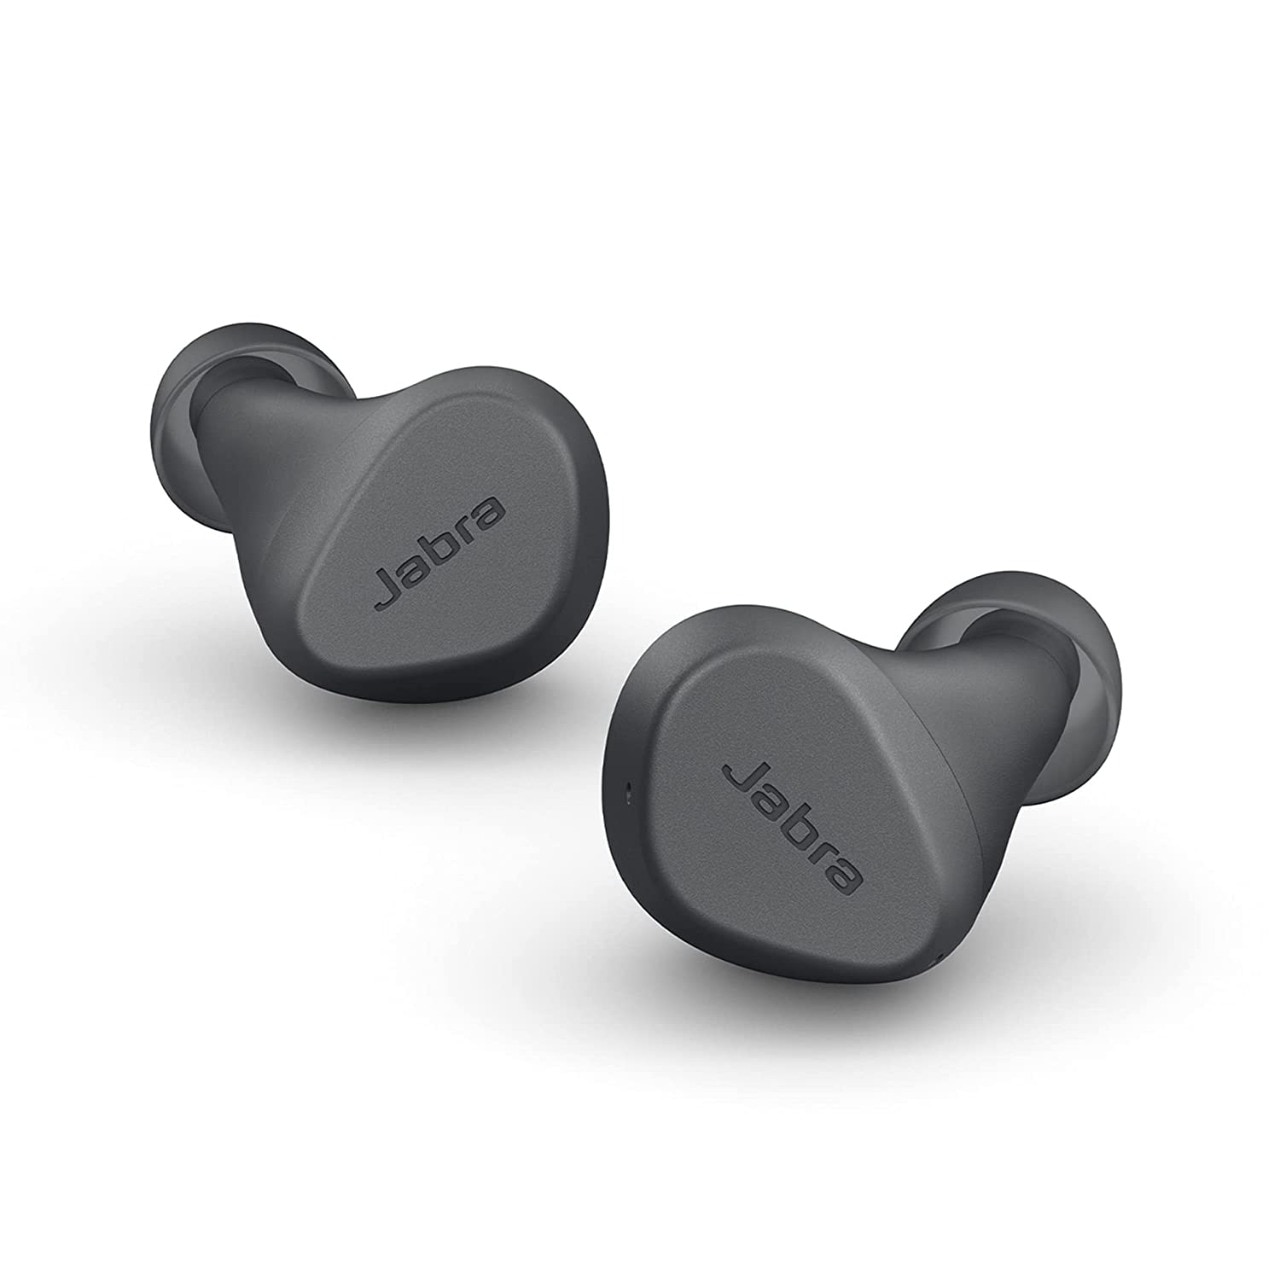 Amazon Deal: Buy the best wireless headphones with great features for up to 75% off on Jabra brand earbuds on Amazon